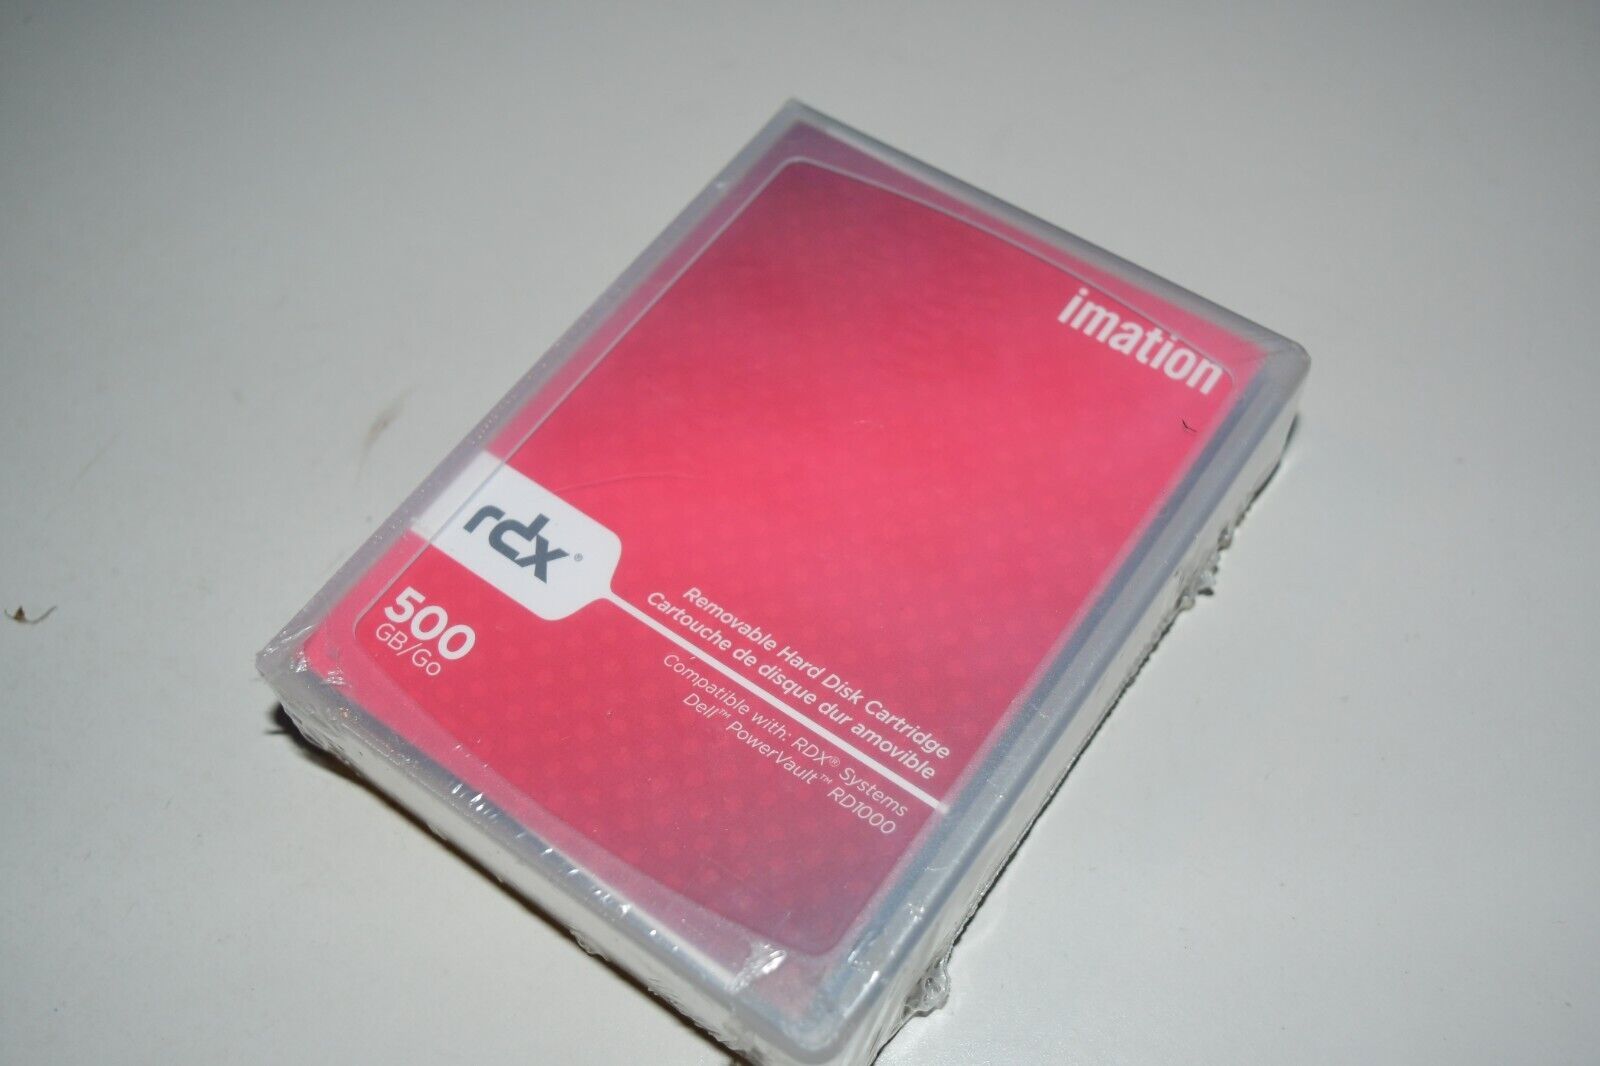 Imation RDX Removable HARD DISK CARTRIDGE 500GB SEALED NEW RARE W1A - $68.82